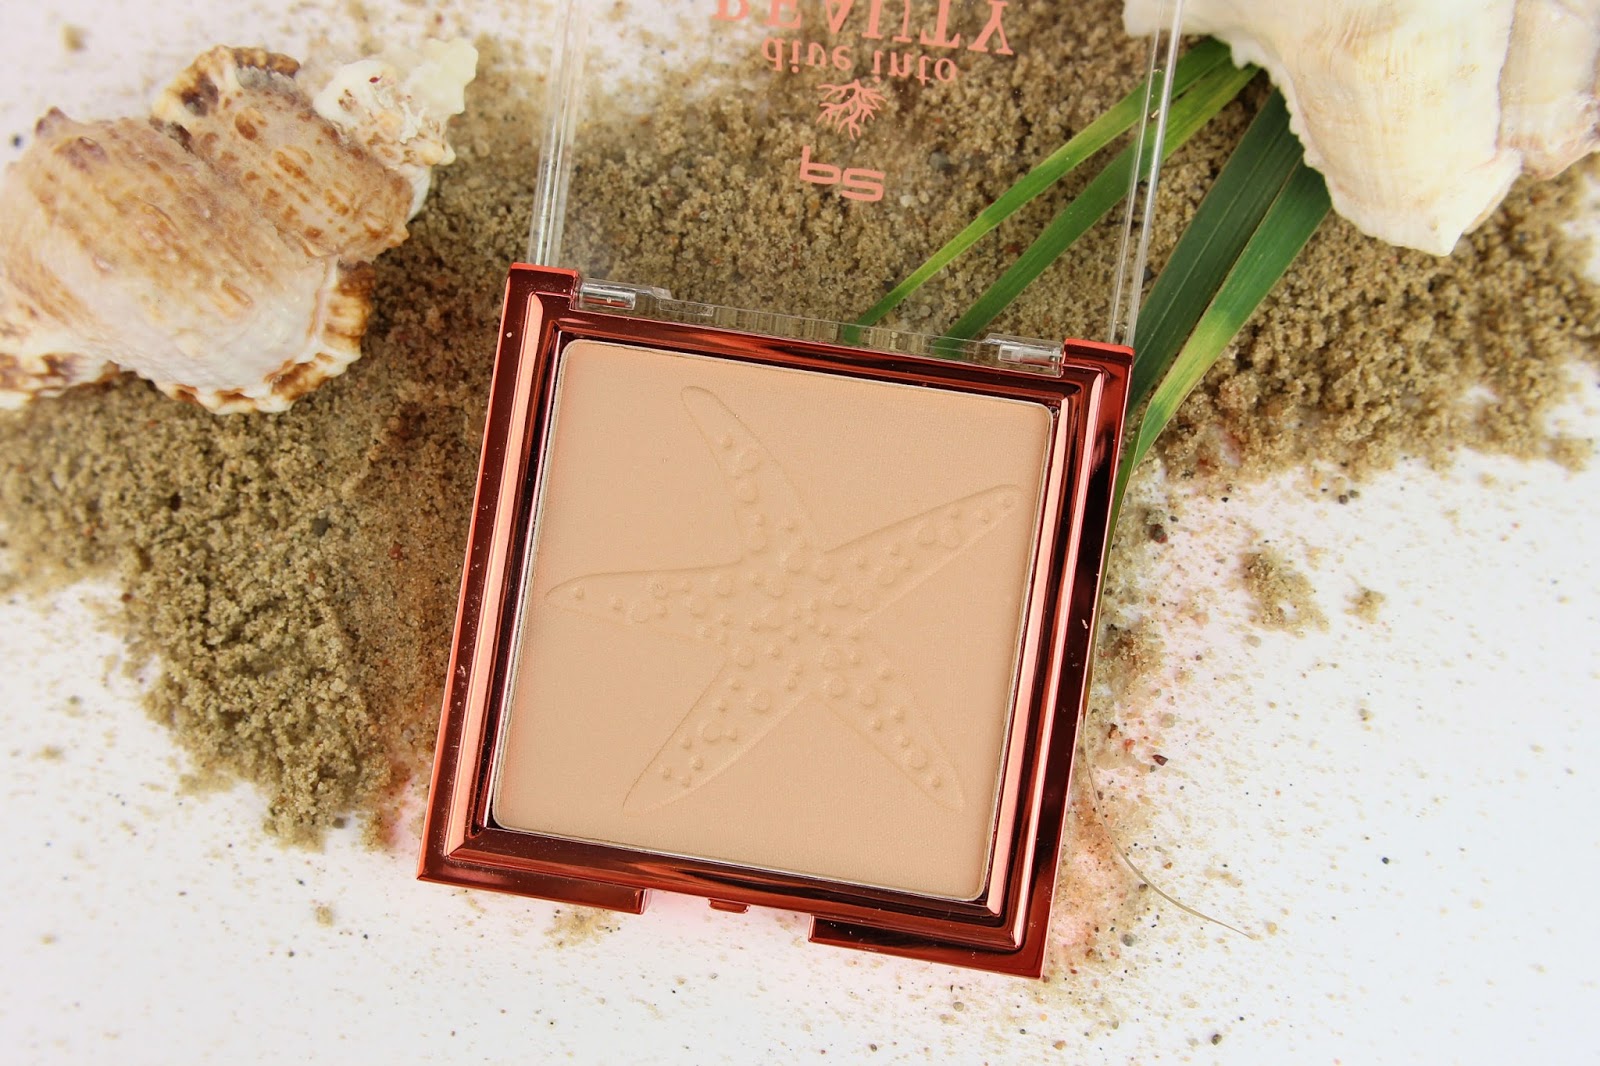 aquatic supreme lipstick, cosmetics, dive into beauty, dm deutschland, drogerie, highlighter, le, limited edition, lippenstift, nagellack, p2, puder, review, silky smooth compact powder, swatches, tragebilder, 